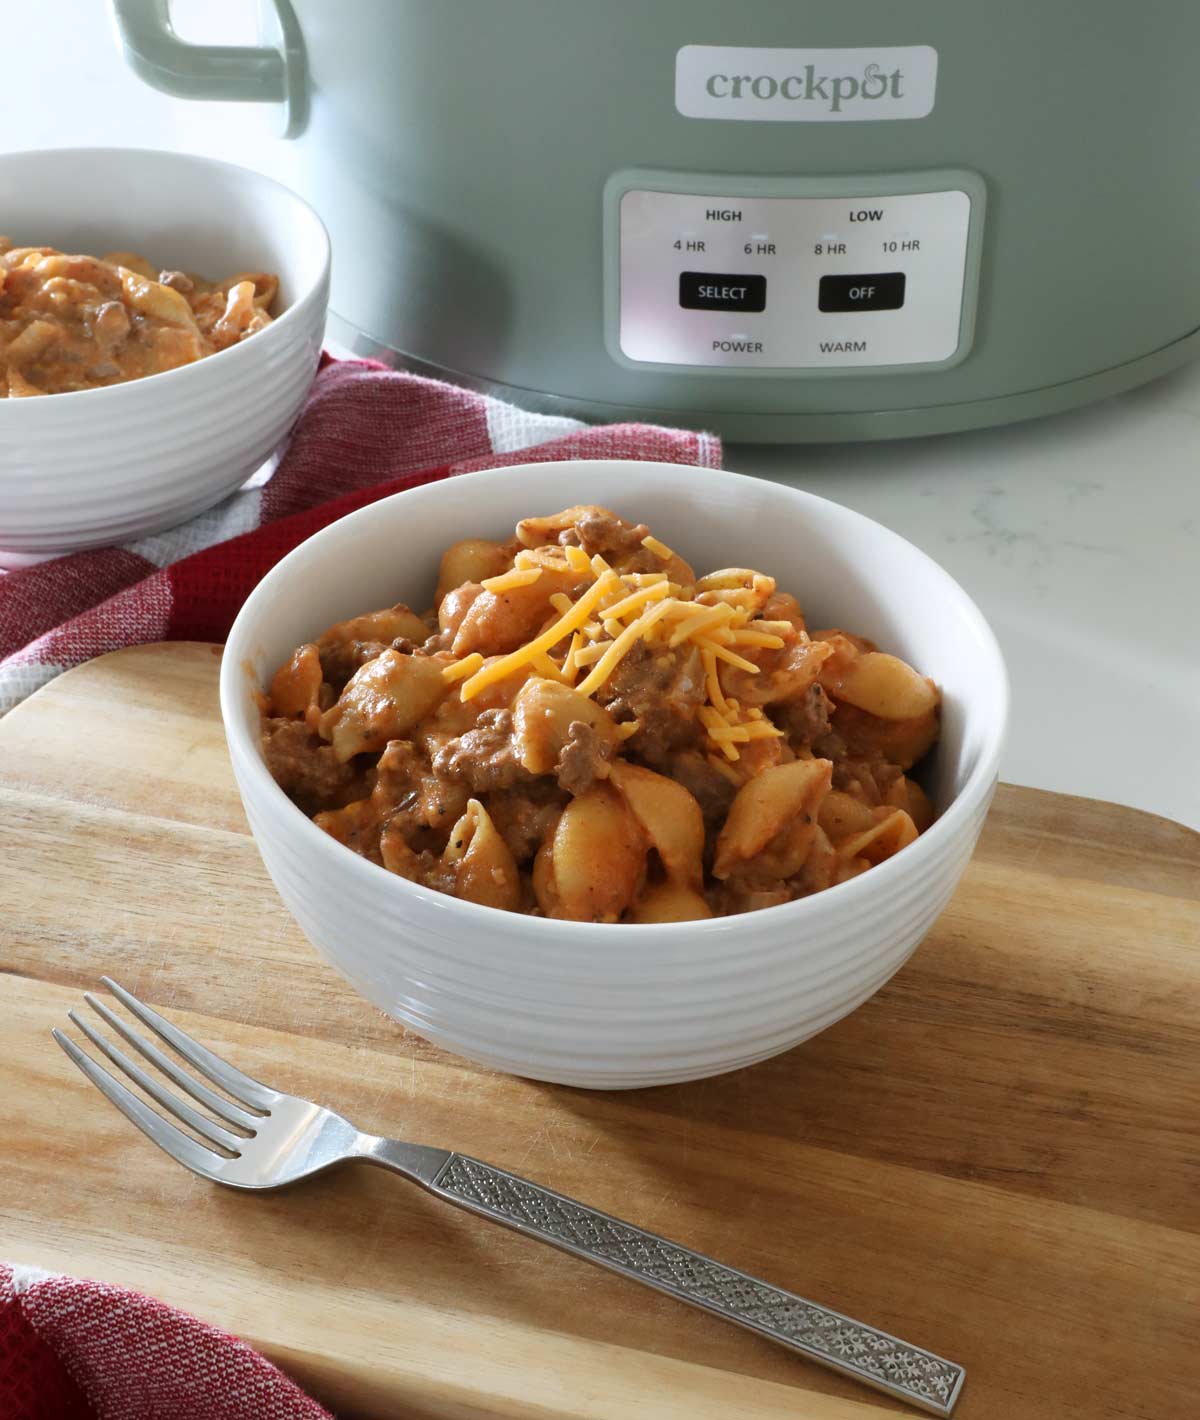 A white ceramic bowl full of hamburger helper rests on top of a wooden board and red towel on top of the kitchen counter, with a fork in the foreground and a crock pot along with another bowl in background.